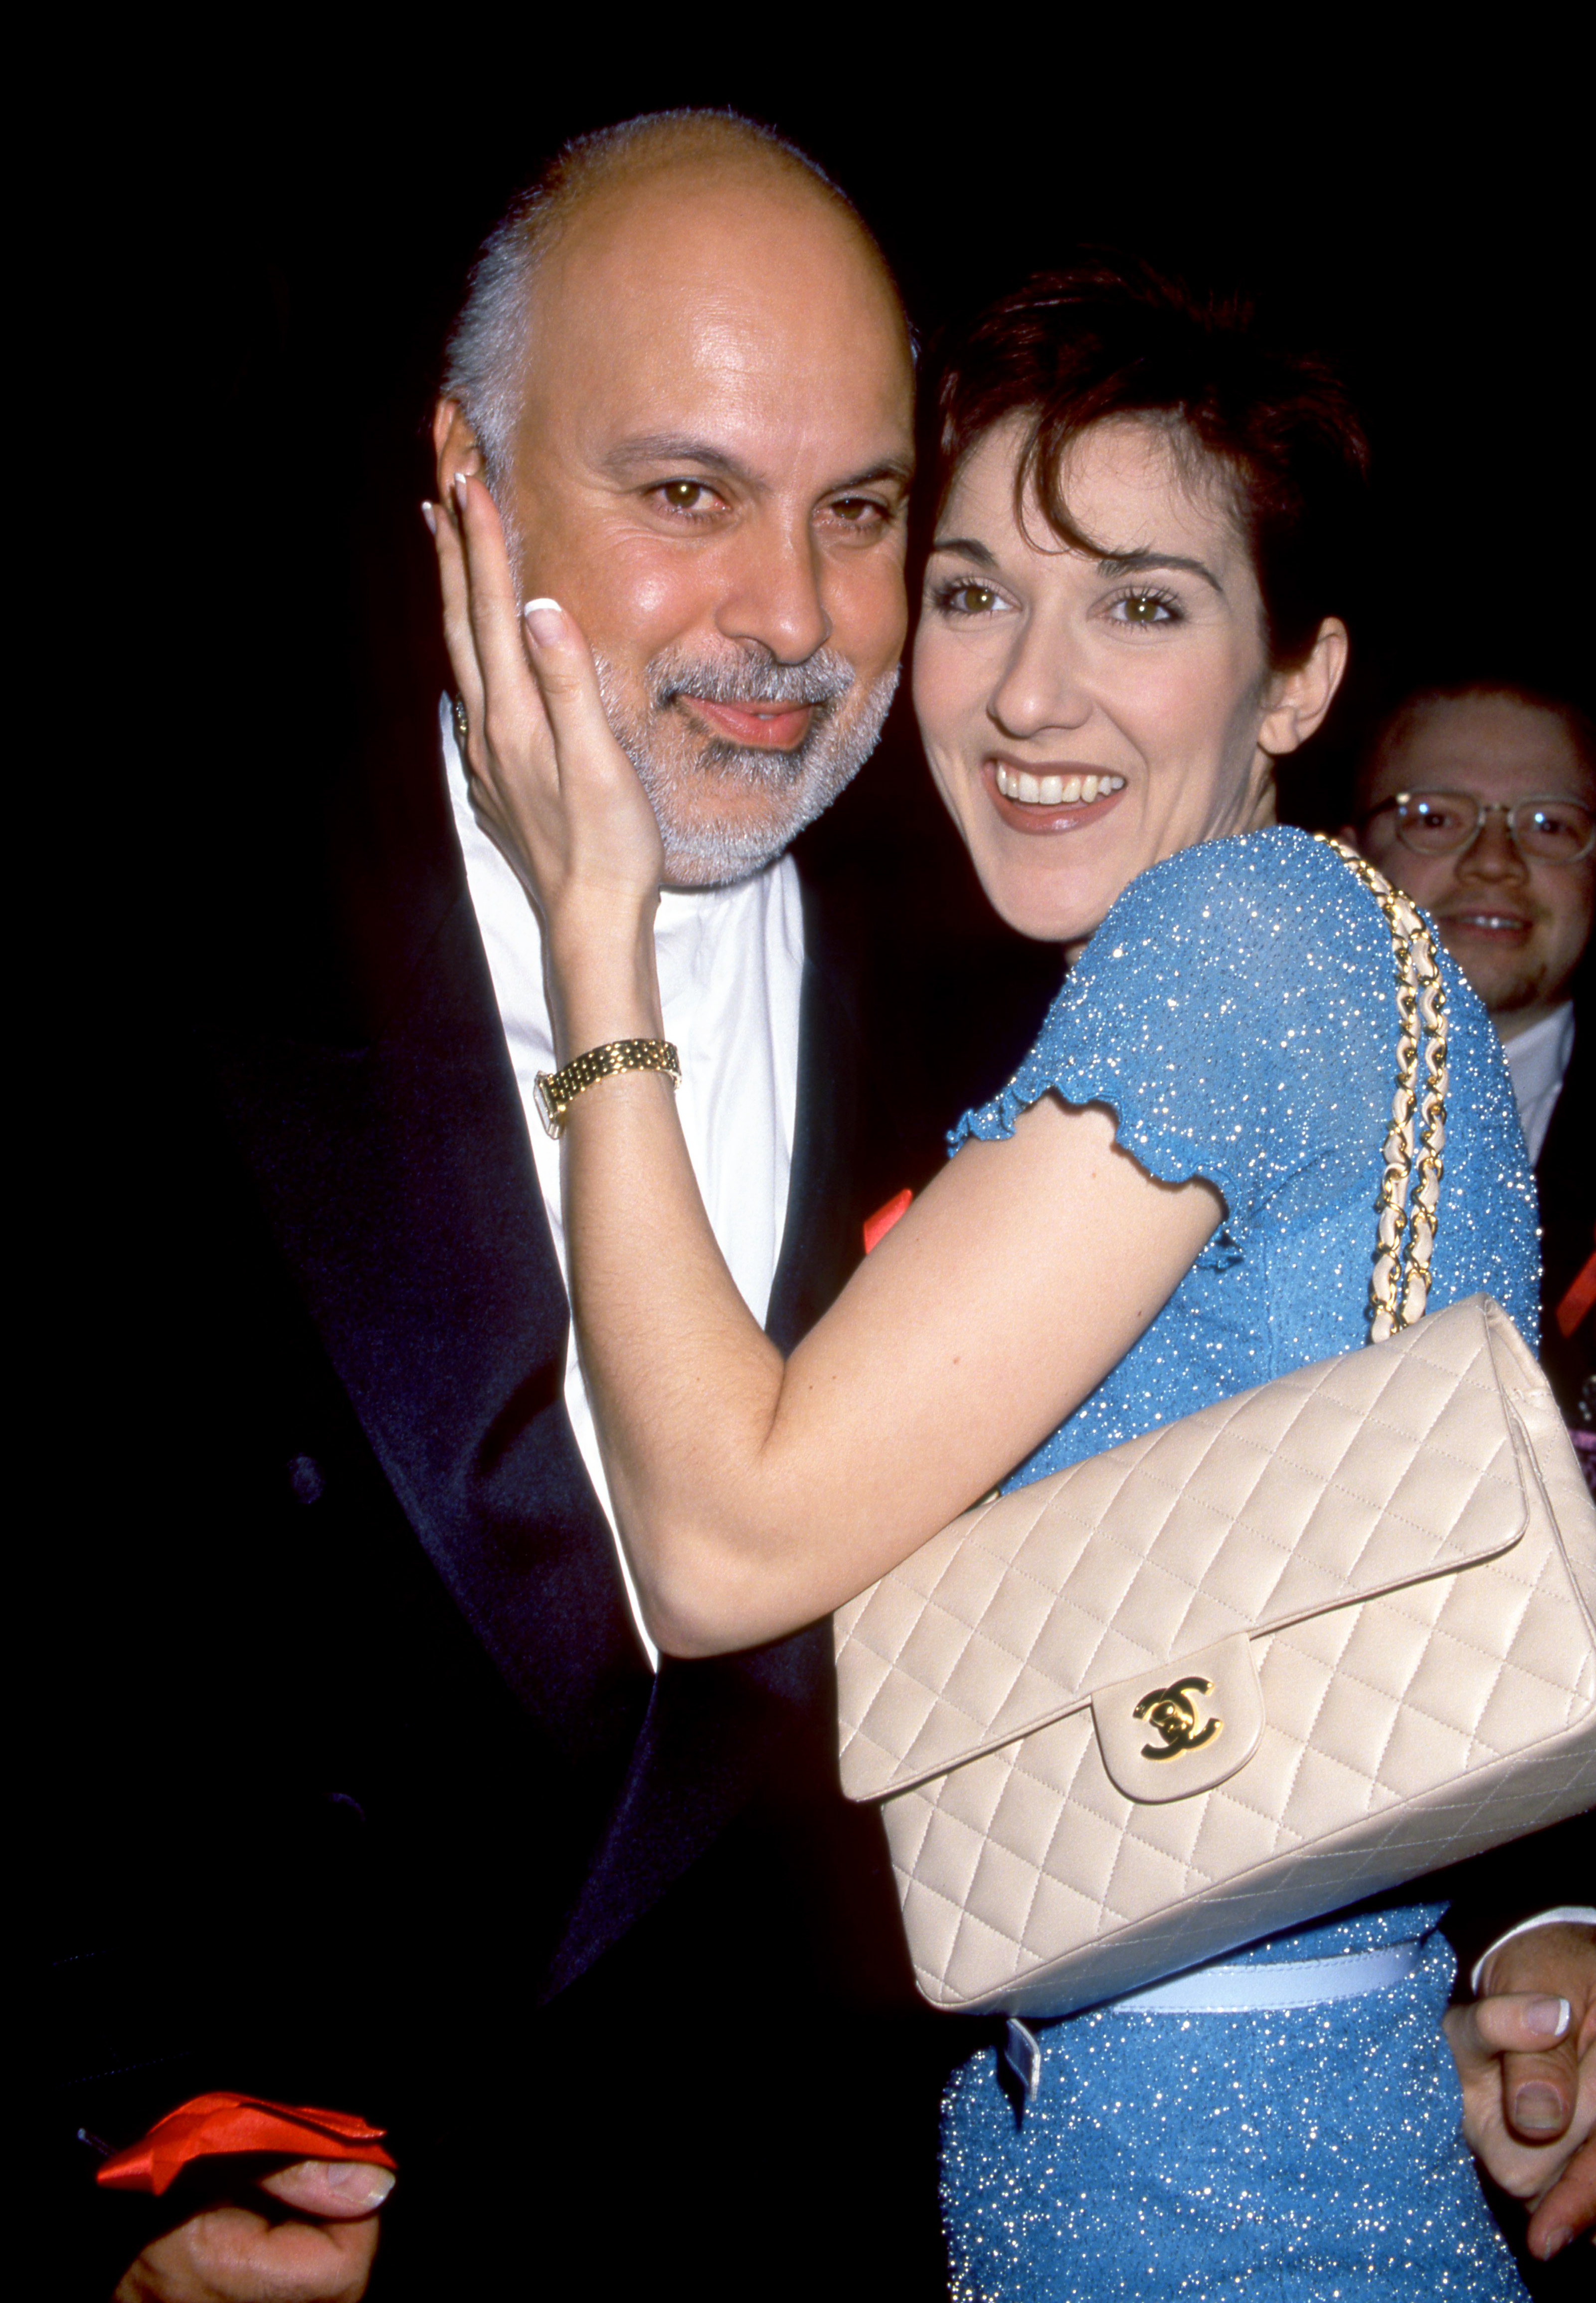 Celine Dion and Rene Angelil at The 22nd Annual American Music Awards on January 30, 1995 in Los Angeles, California. | Source: Getty Images